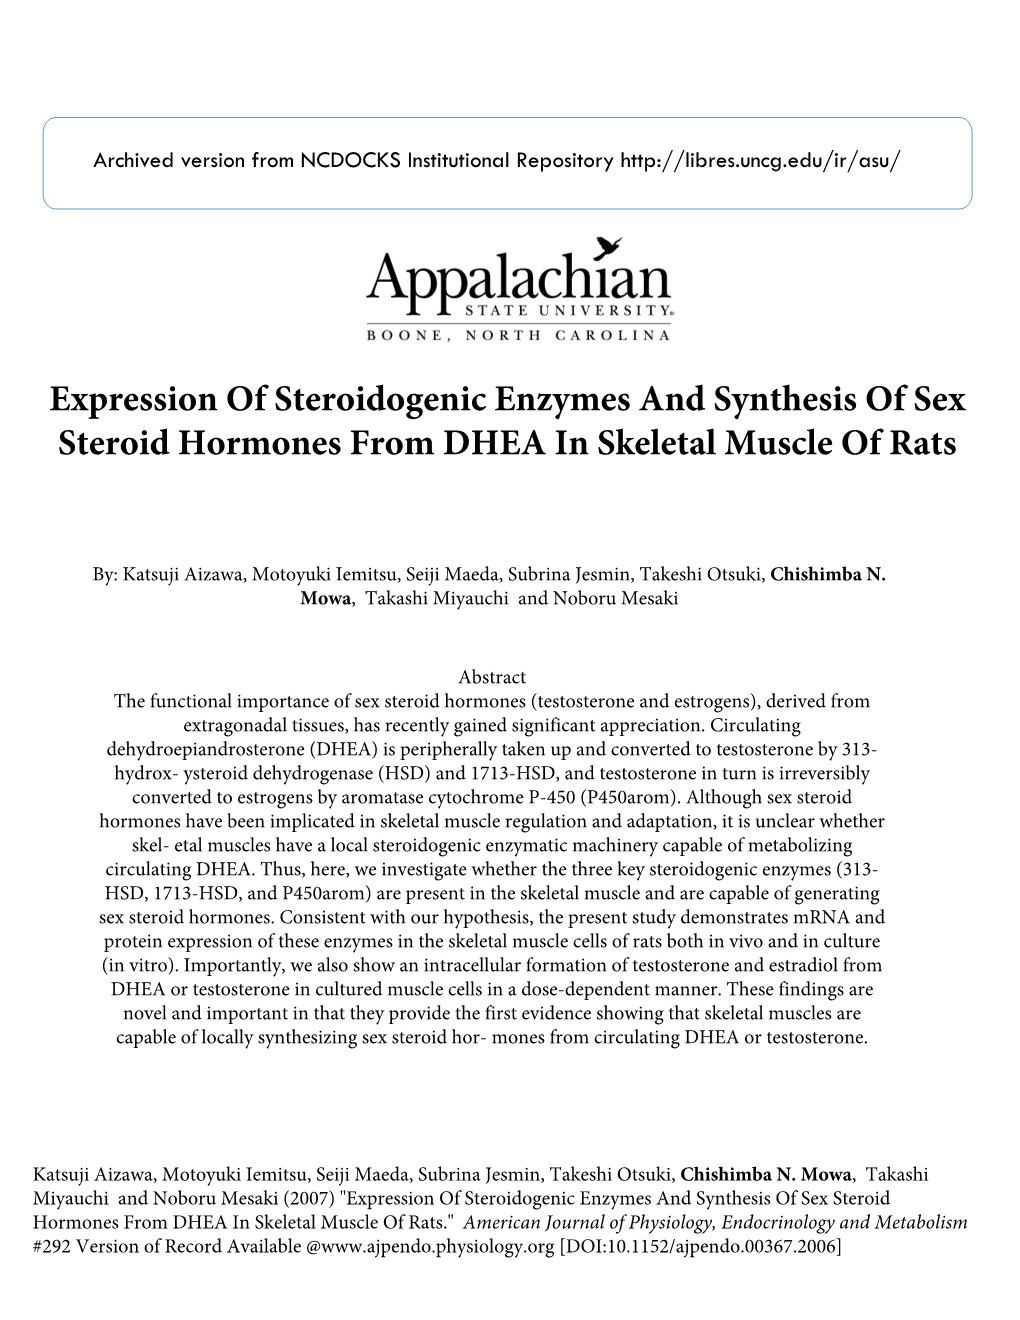 Expression of Steroidogenic Enzymes and Synthesis of Sex Steroid Hormones from DHEA in Skeletal Muscle of Rats